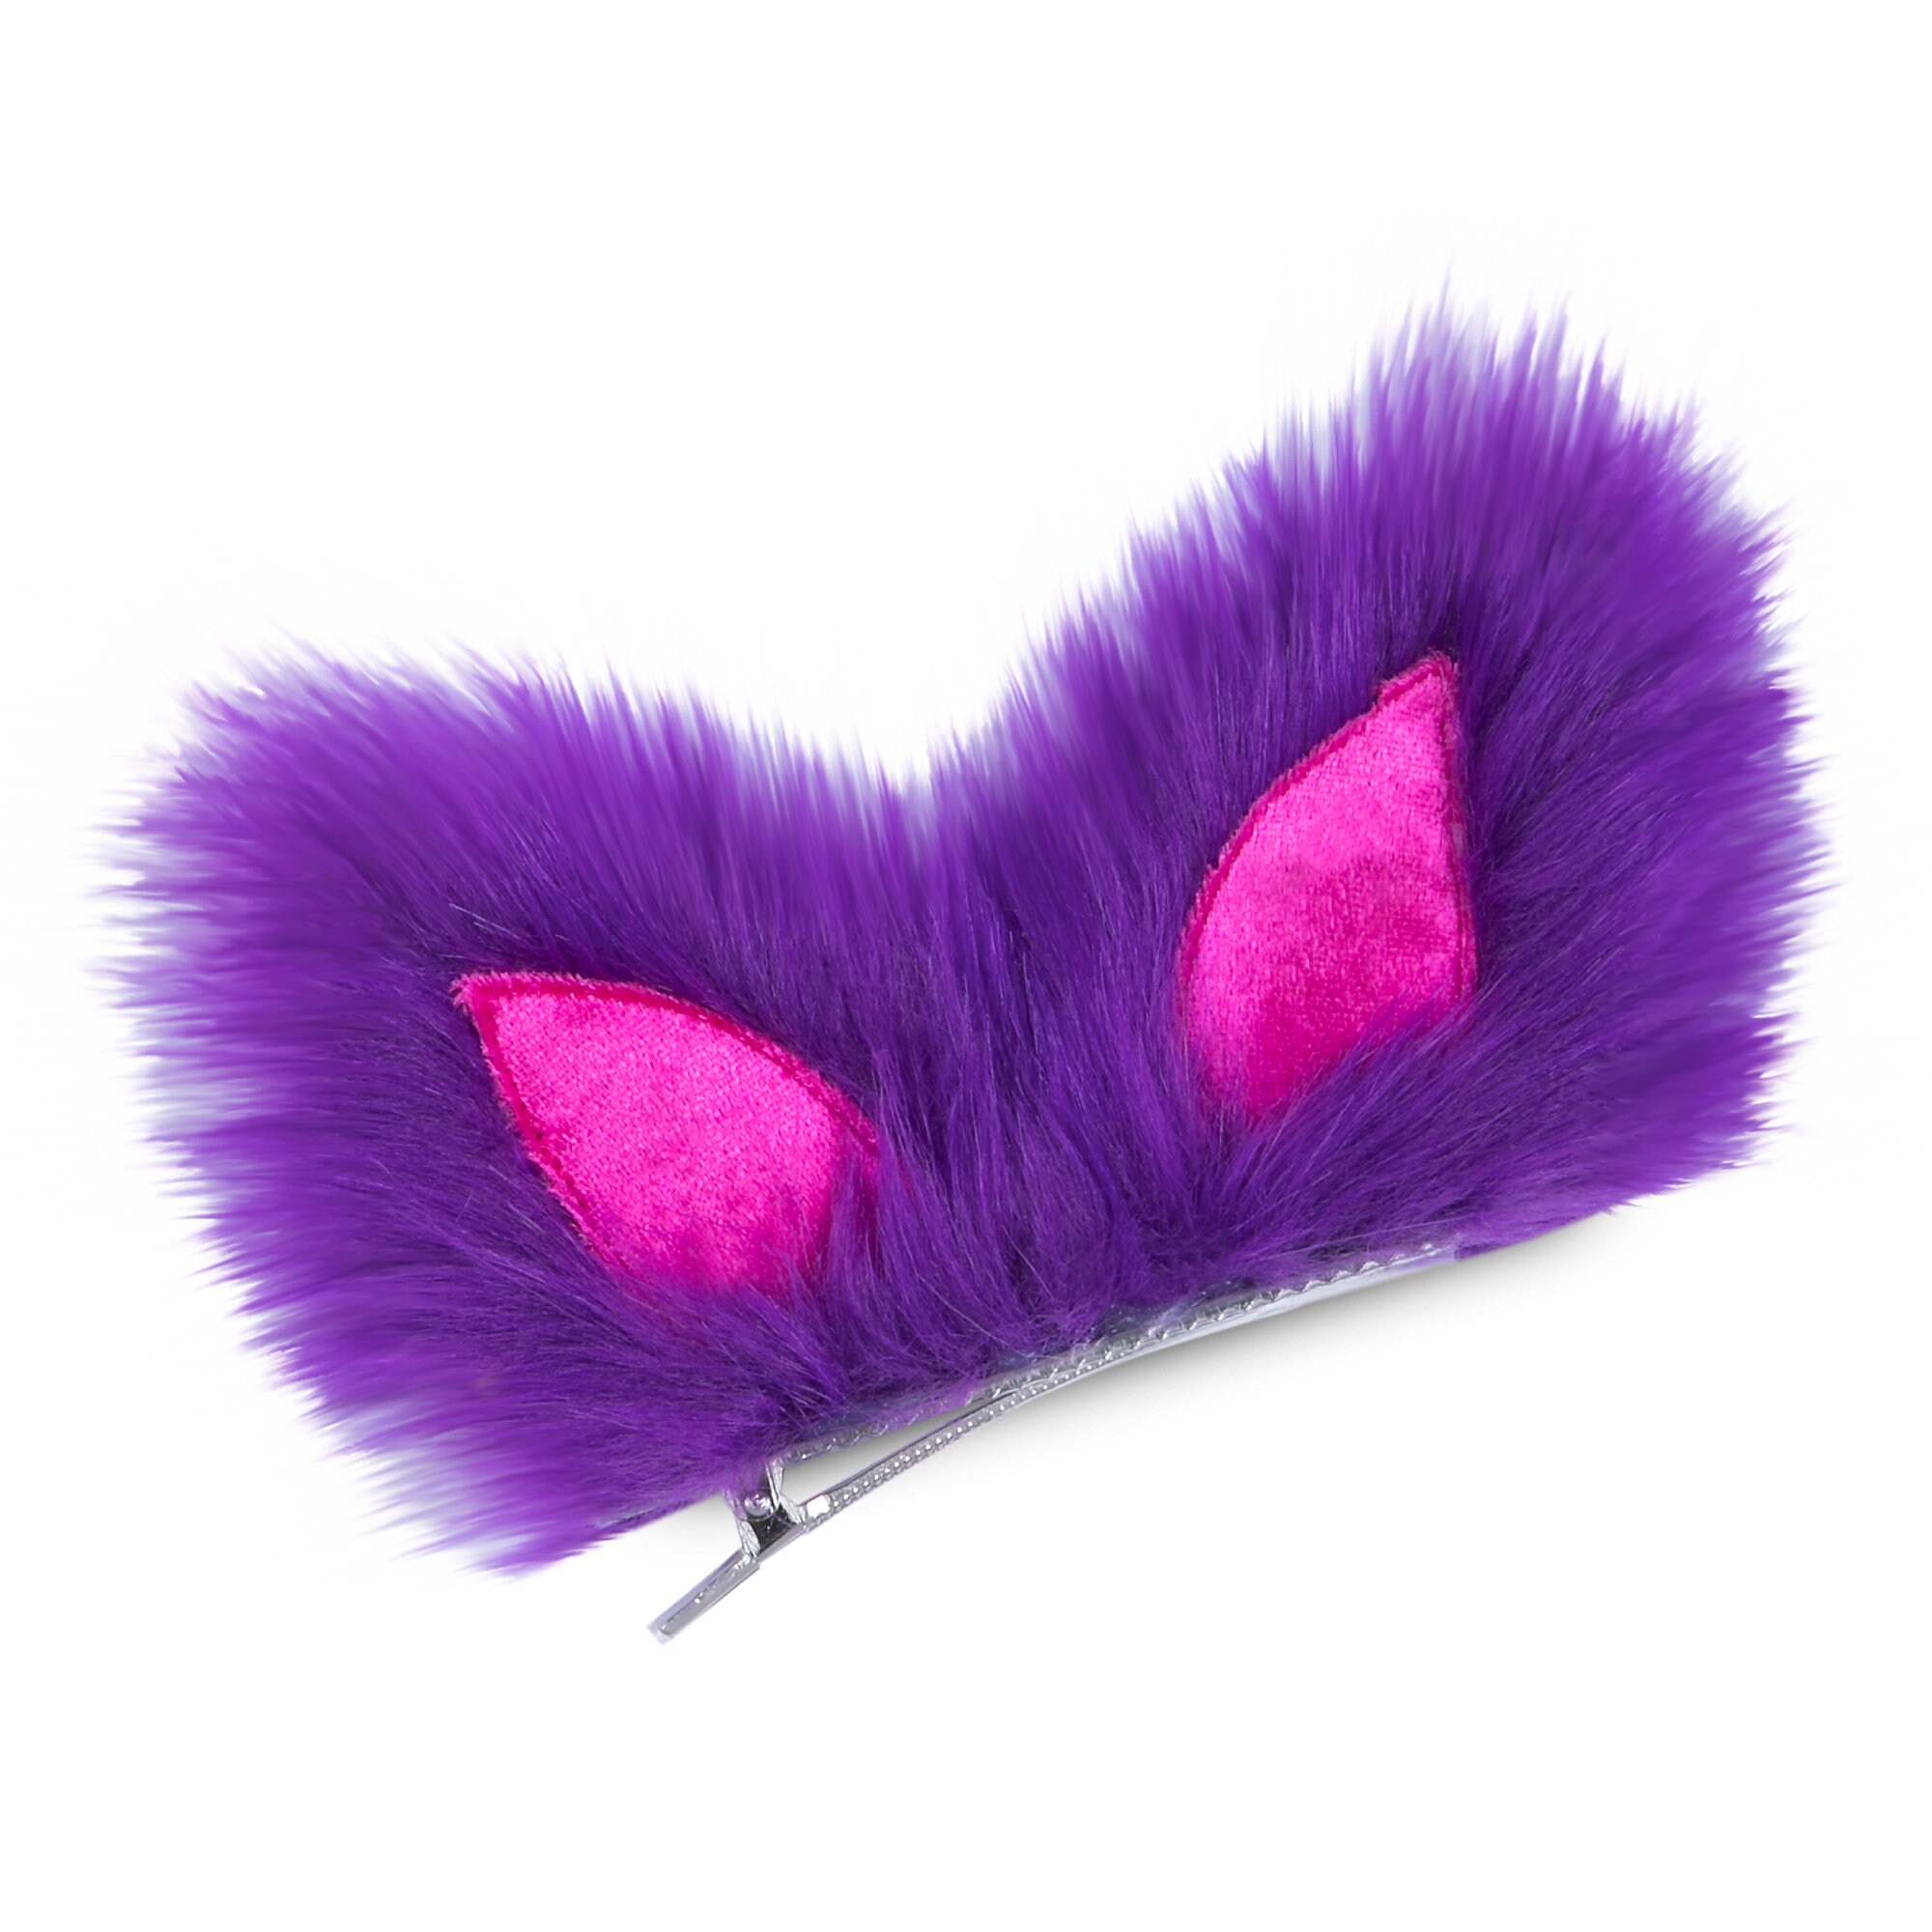 Cheshire Cat Costume with Tutu for Adults - Alice in Wonderland